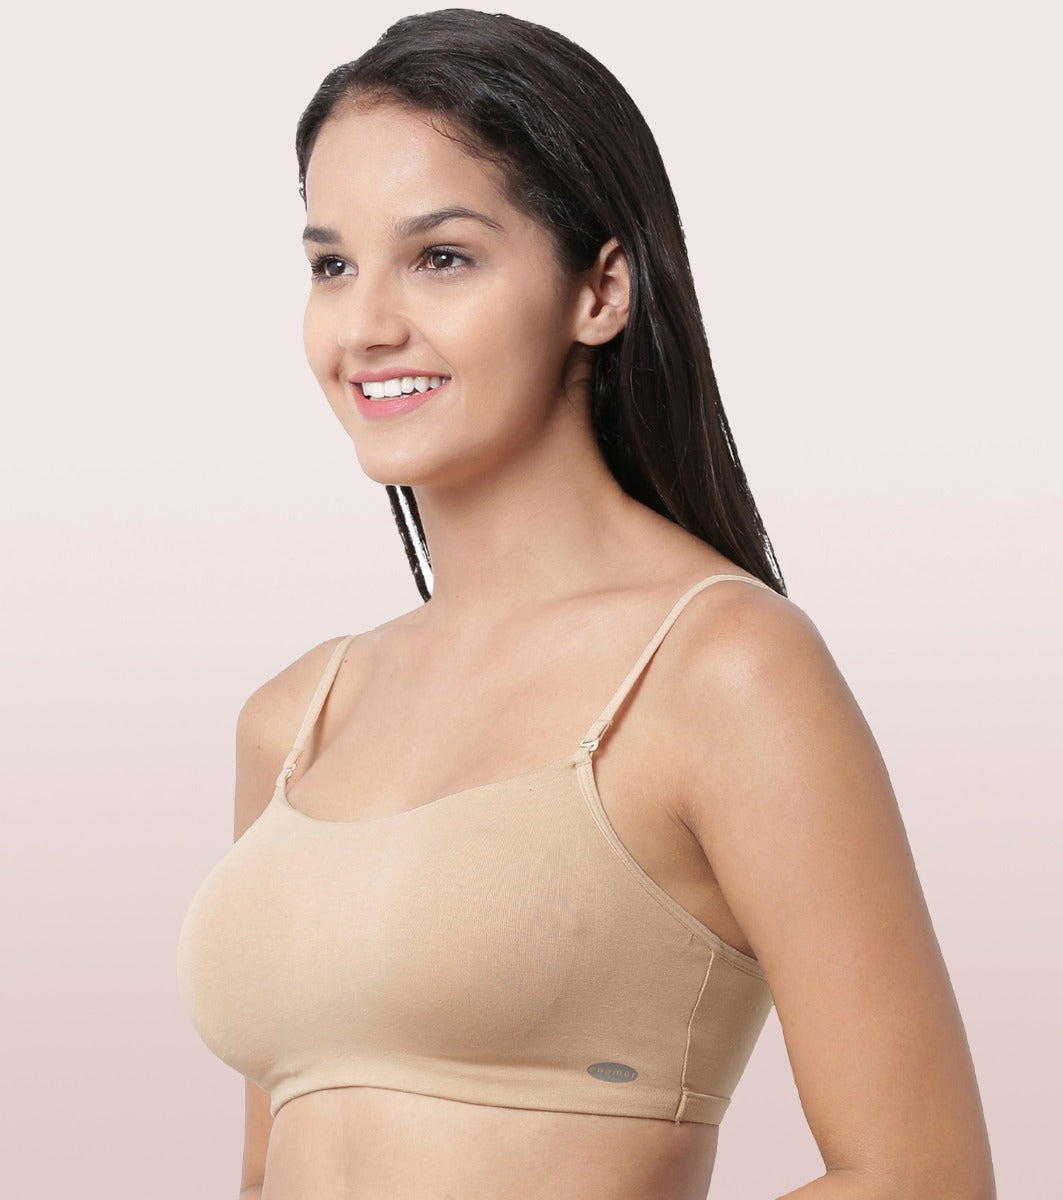 Buy Skin Beauty Everyday Cotton Bra for Women Non Padded, Wirefree